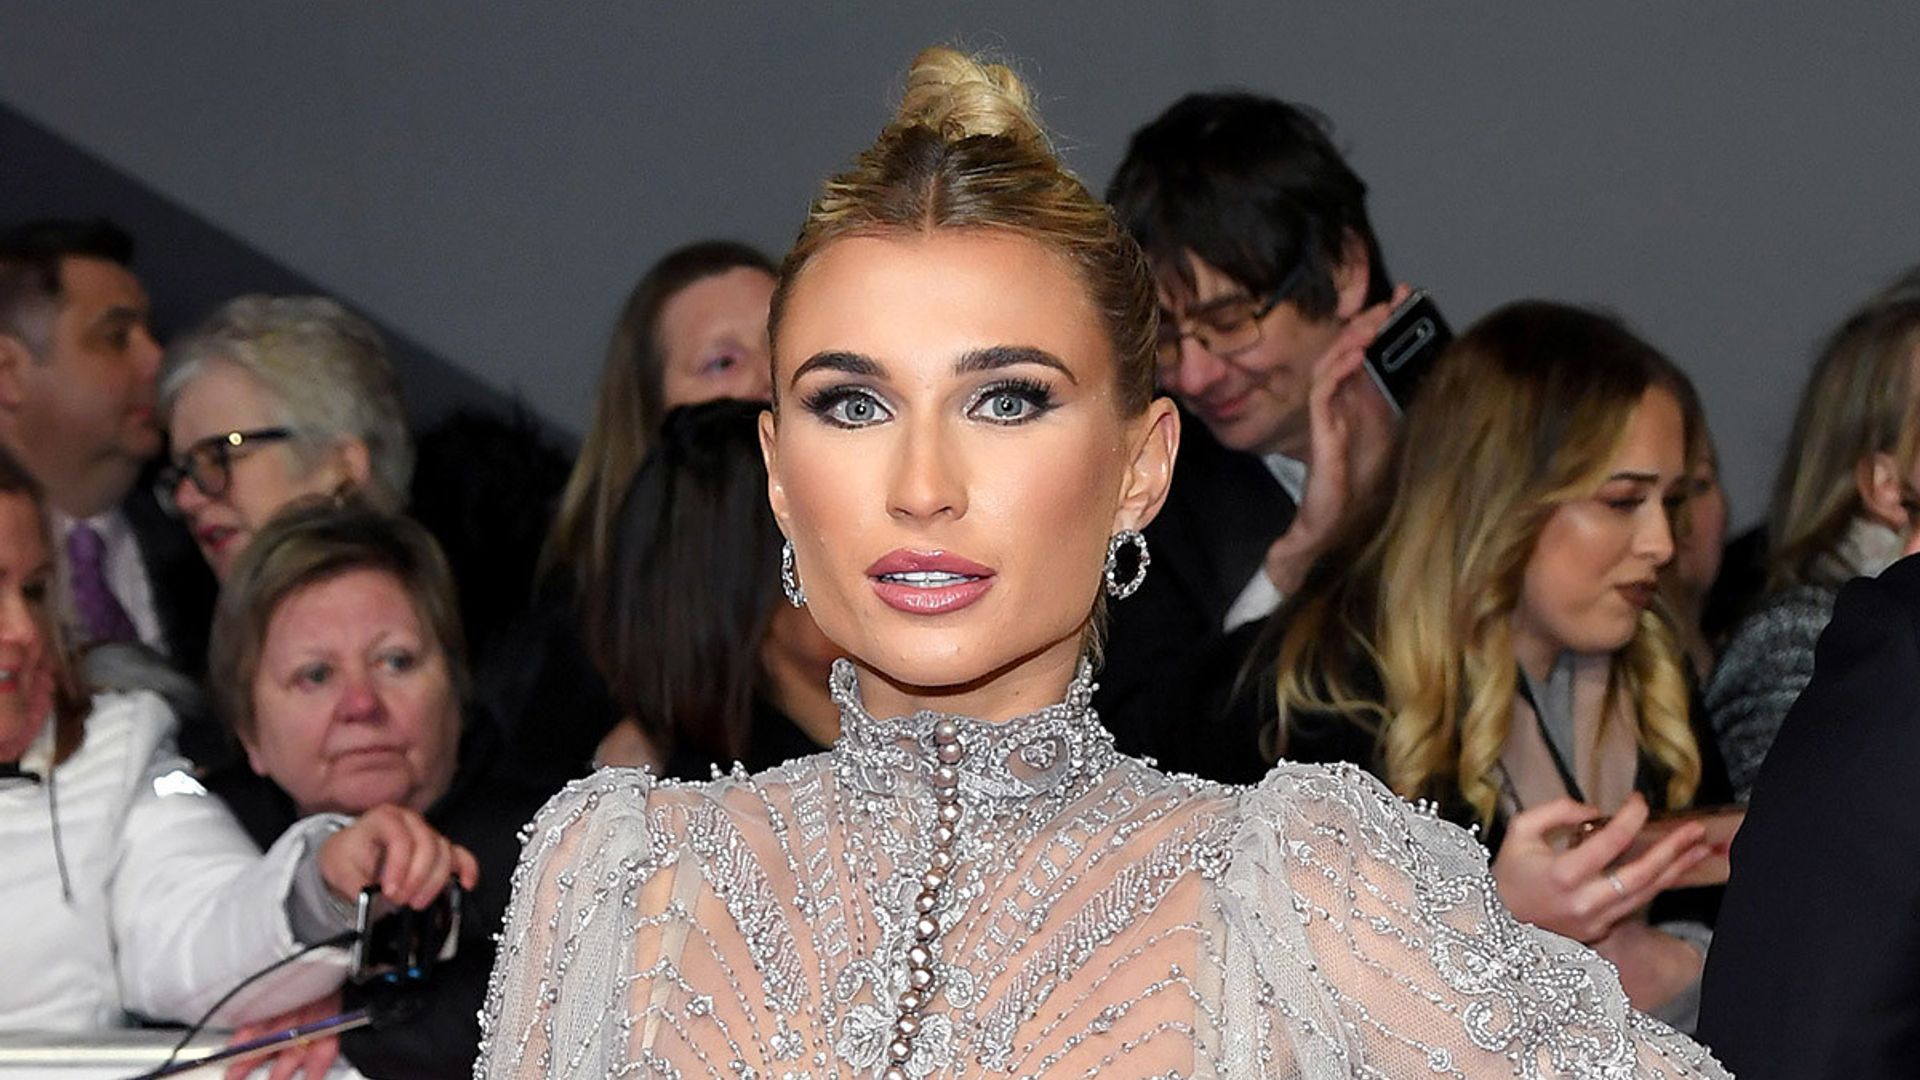 Billie Faiers' fans react to home renovation news after neighbours rejected plans